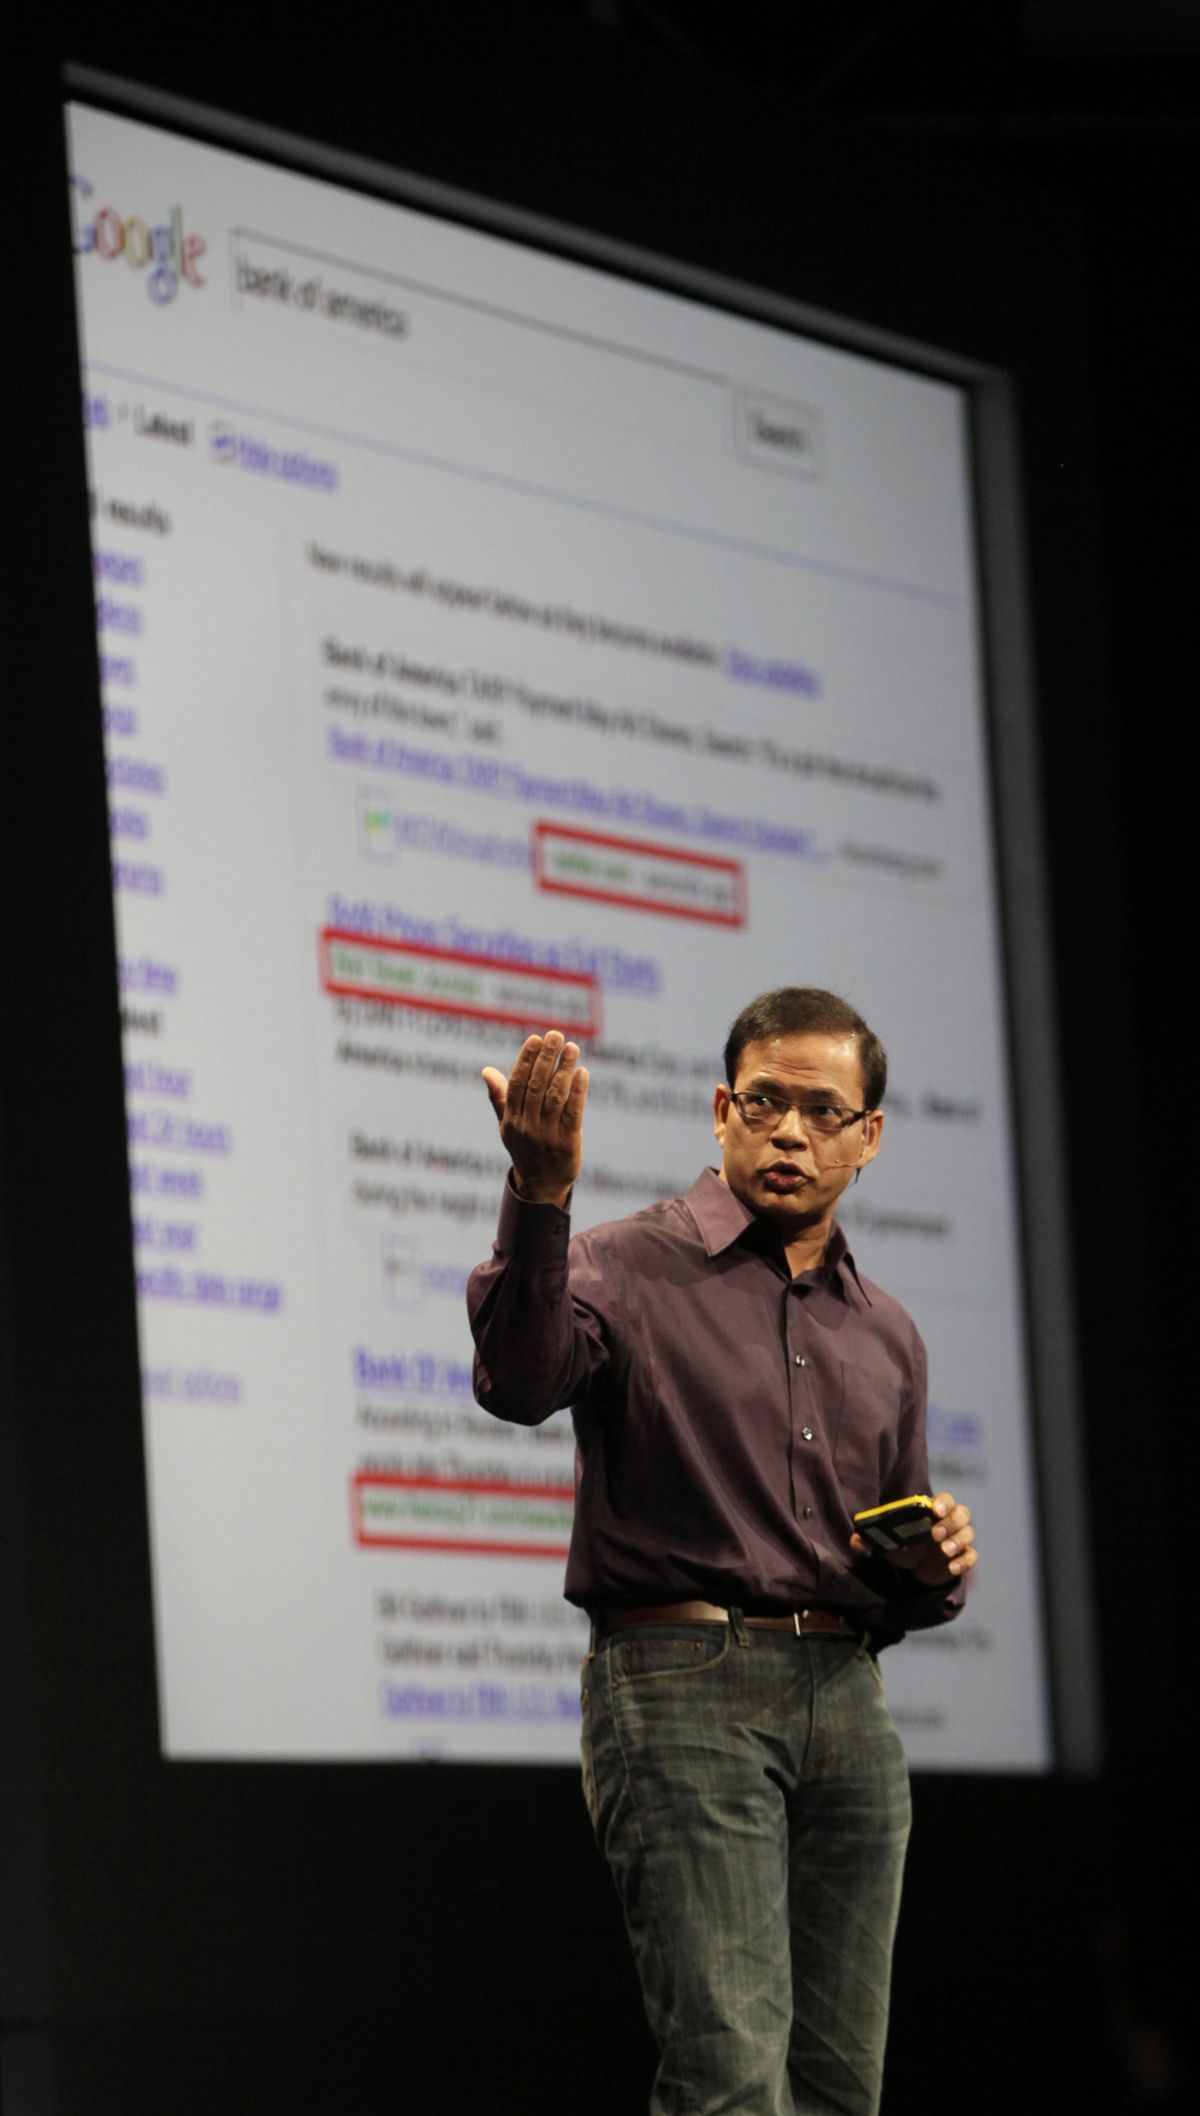 Google fellow Amit Singhal talks about real-time search, a new feature for the Google search engine, on Monday.